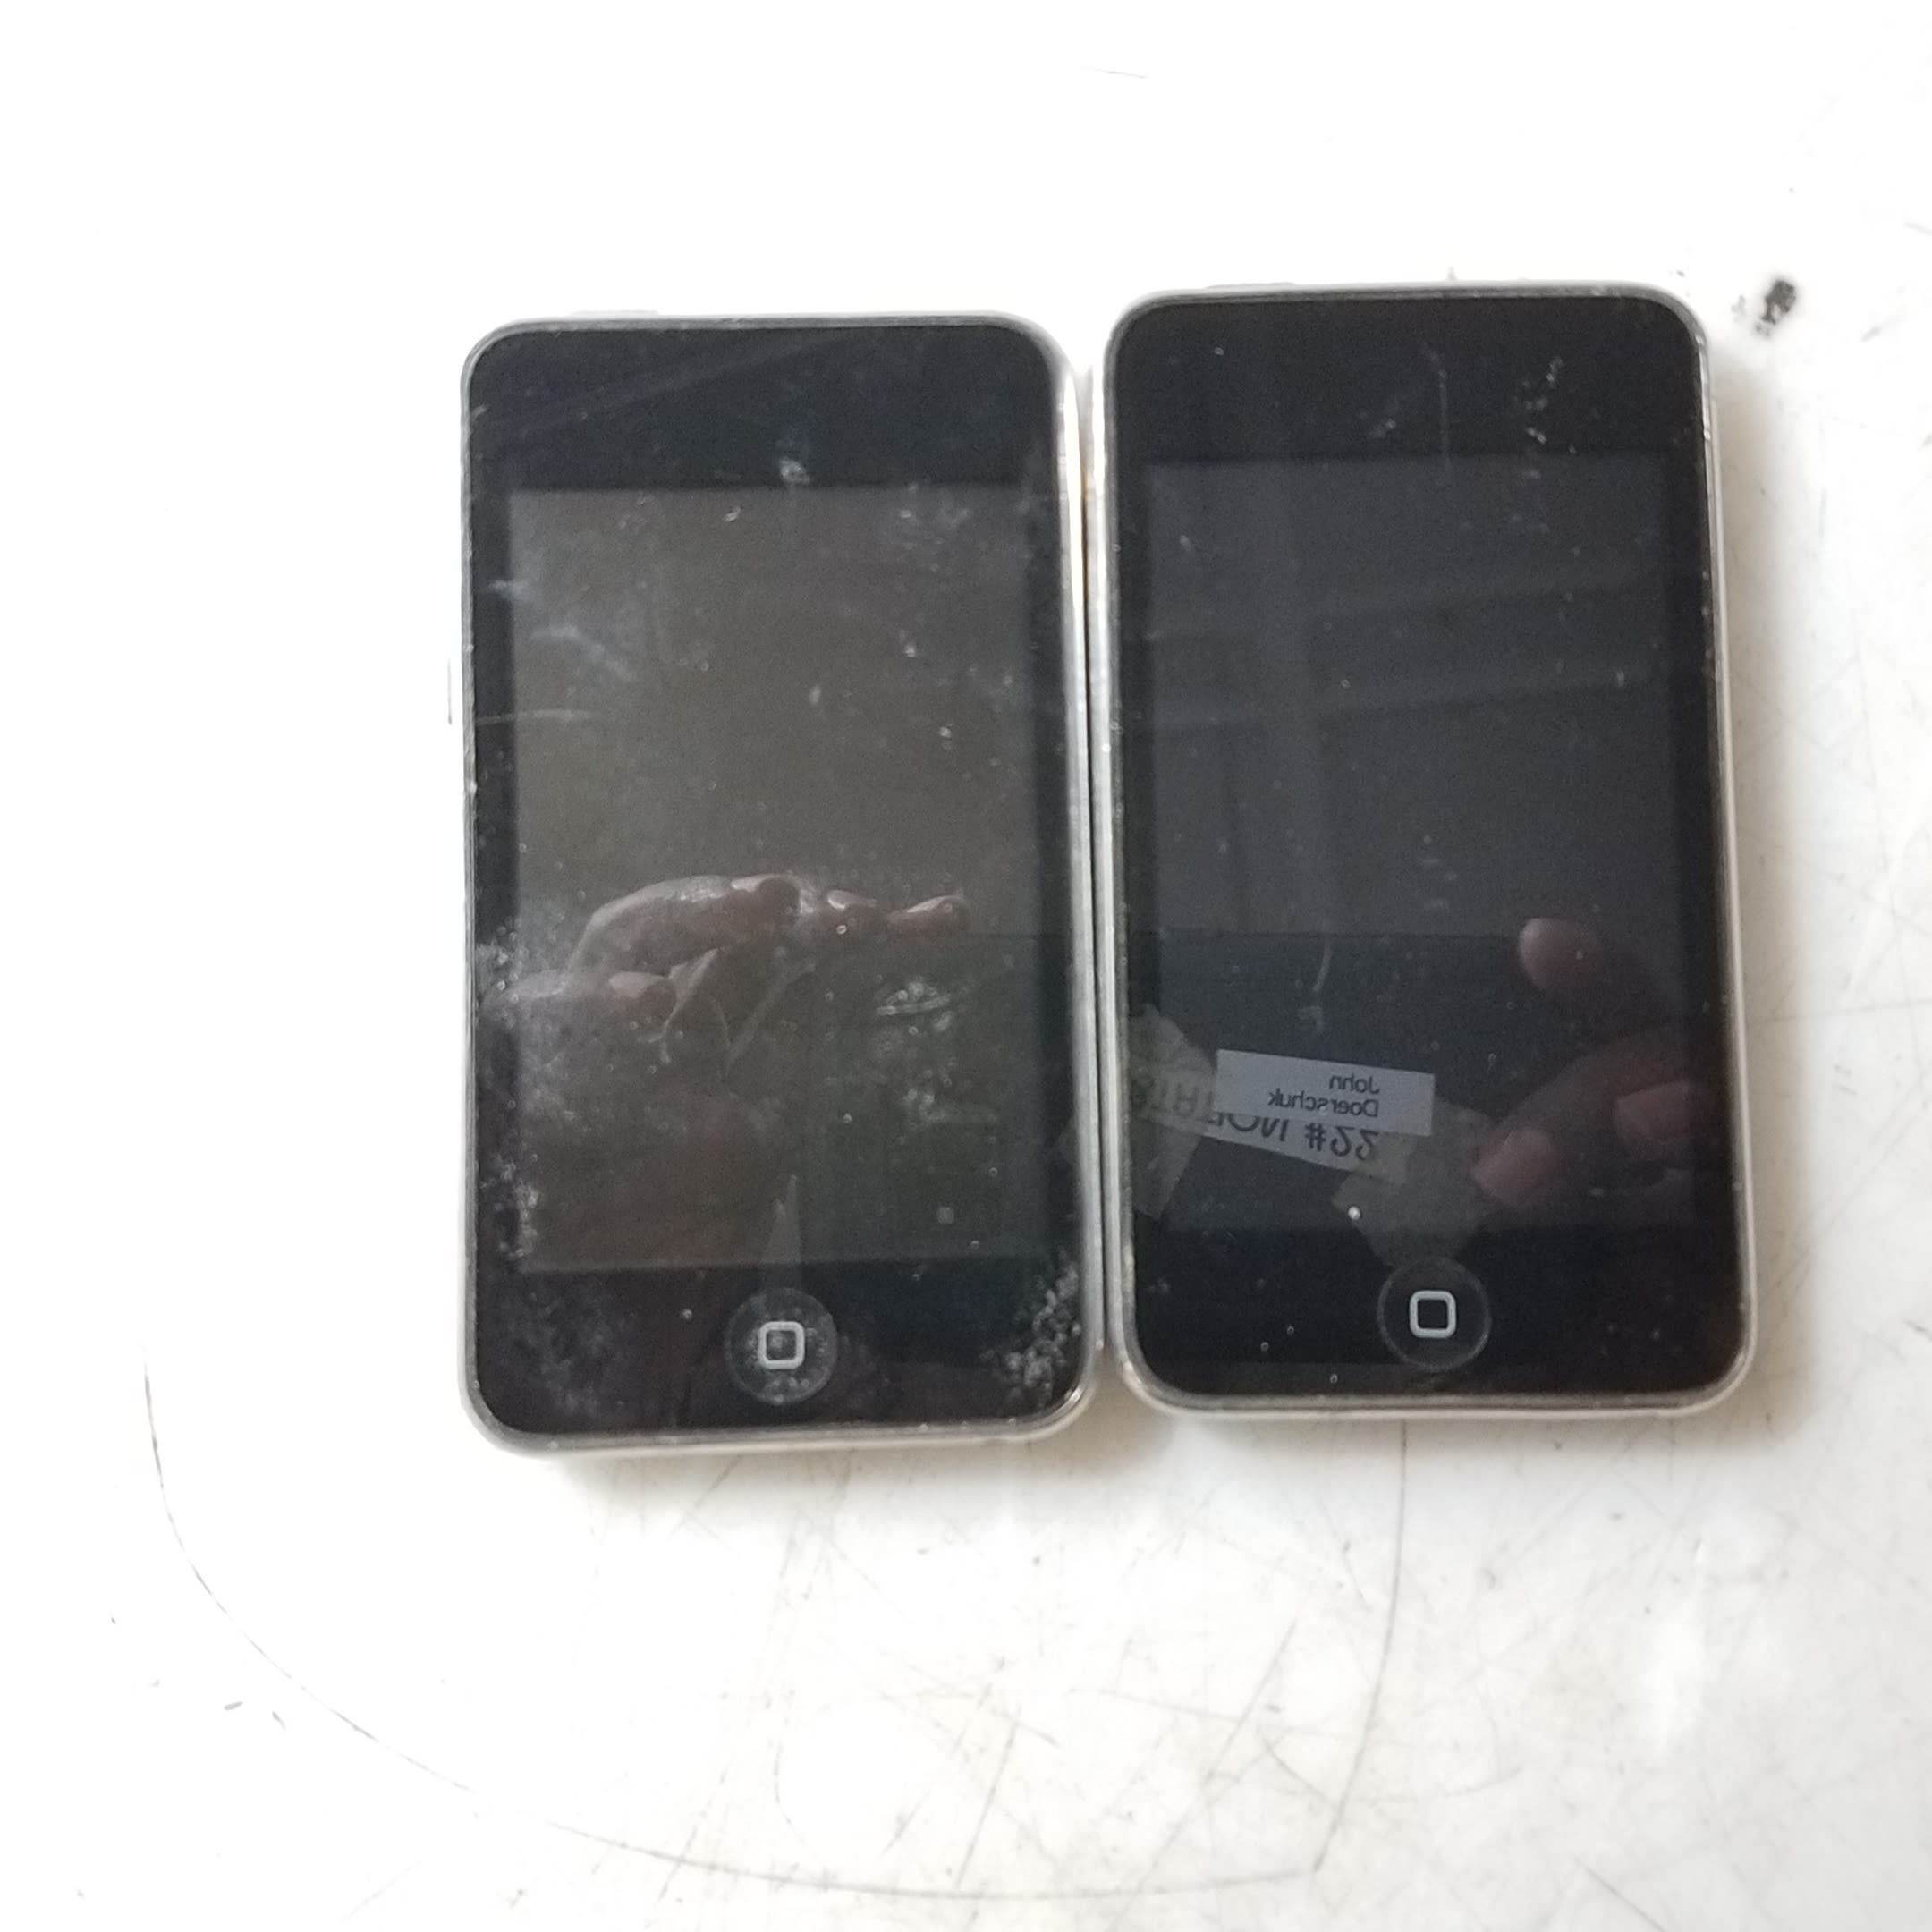 Buy Lot of Two Apple iPod touch 2nd Gen Model A1288 storage 8GB for USD  23.99 | GoodwillFinds